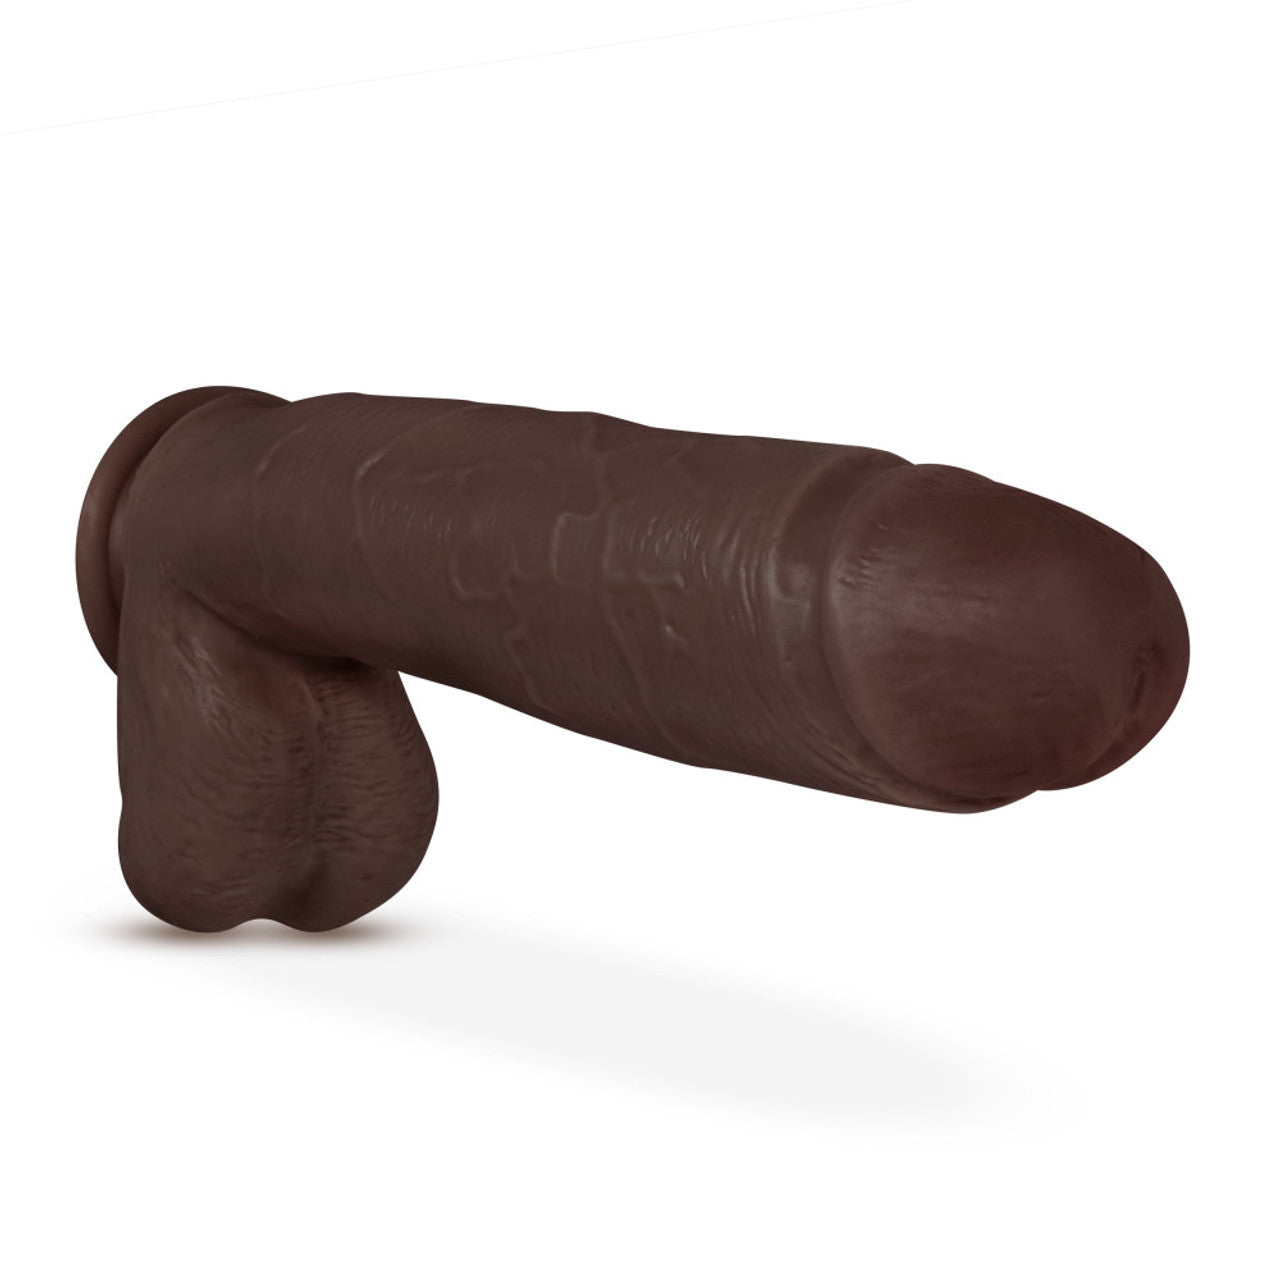 Dr. Skin Mr. Mister 10.5" Dildo with Suction - Chocolate - Thorn & Feather Sex Toy Canada